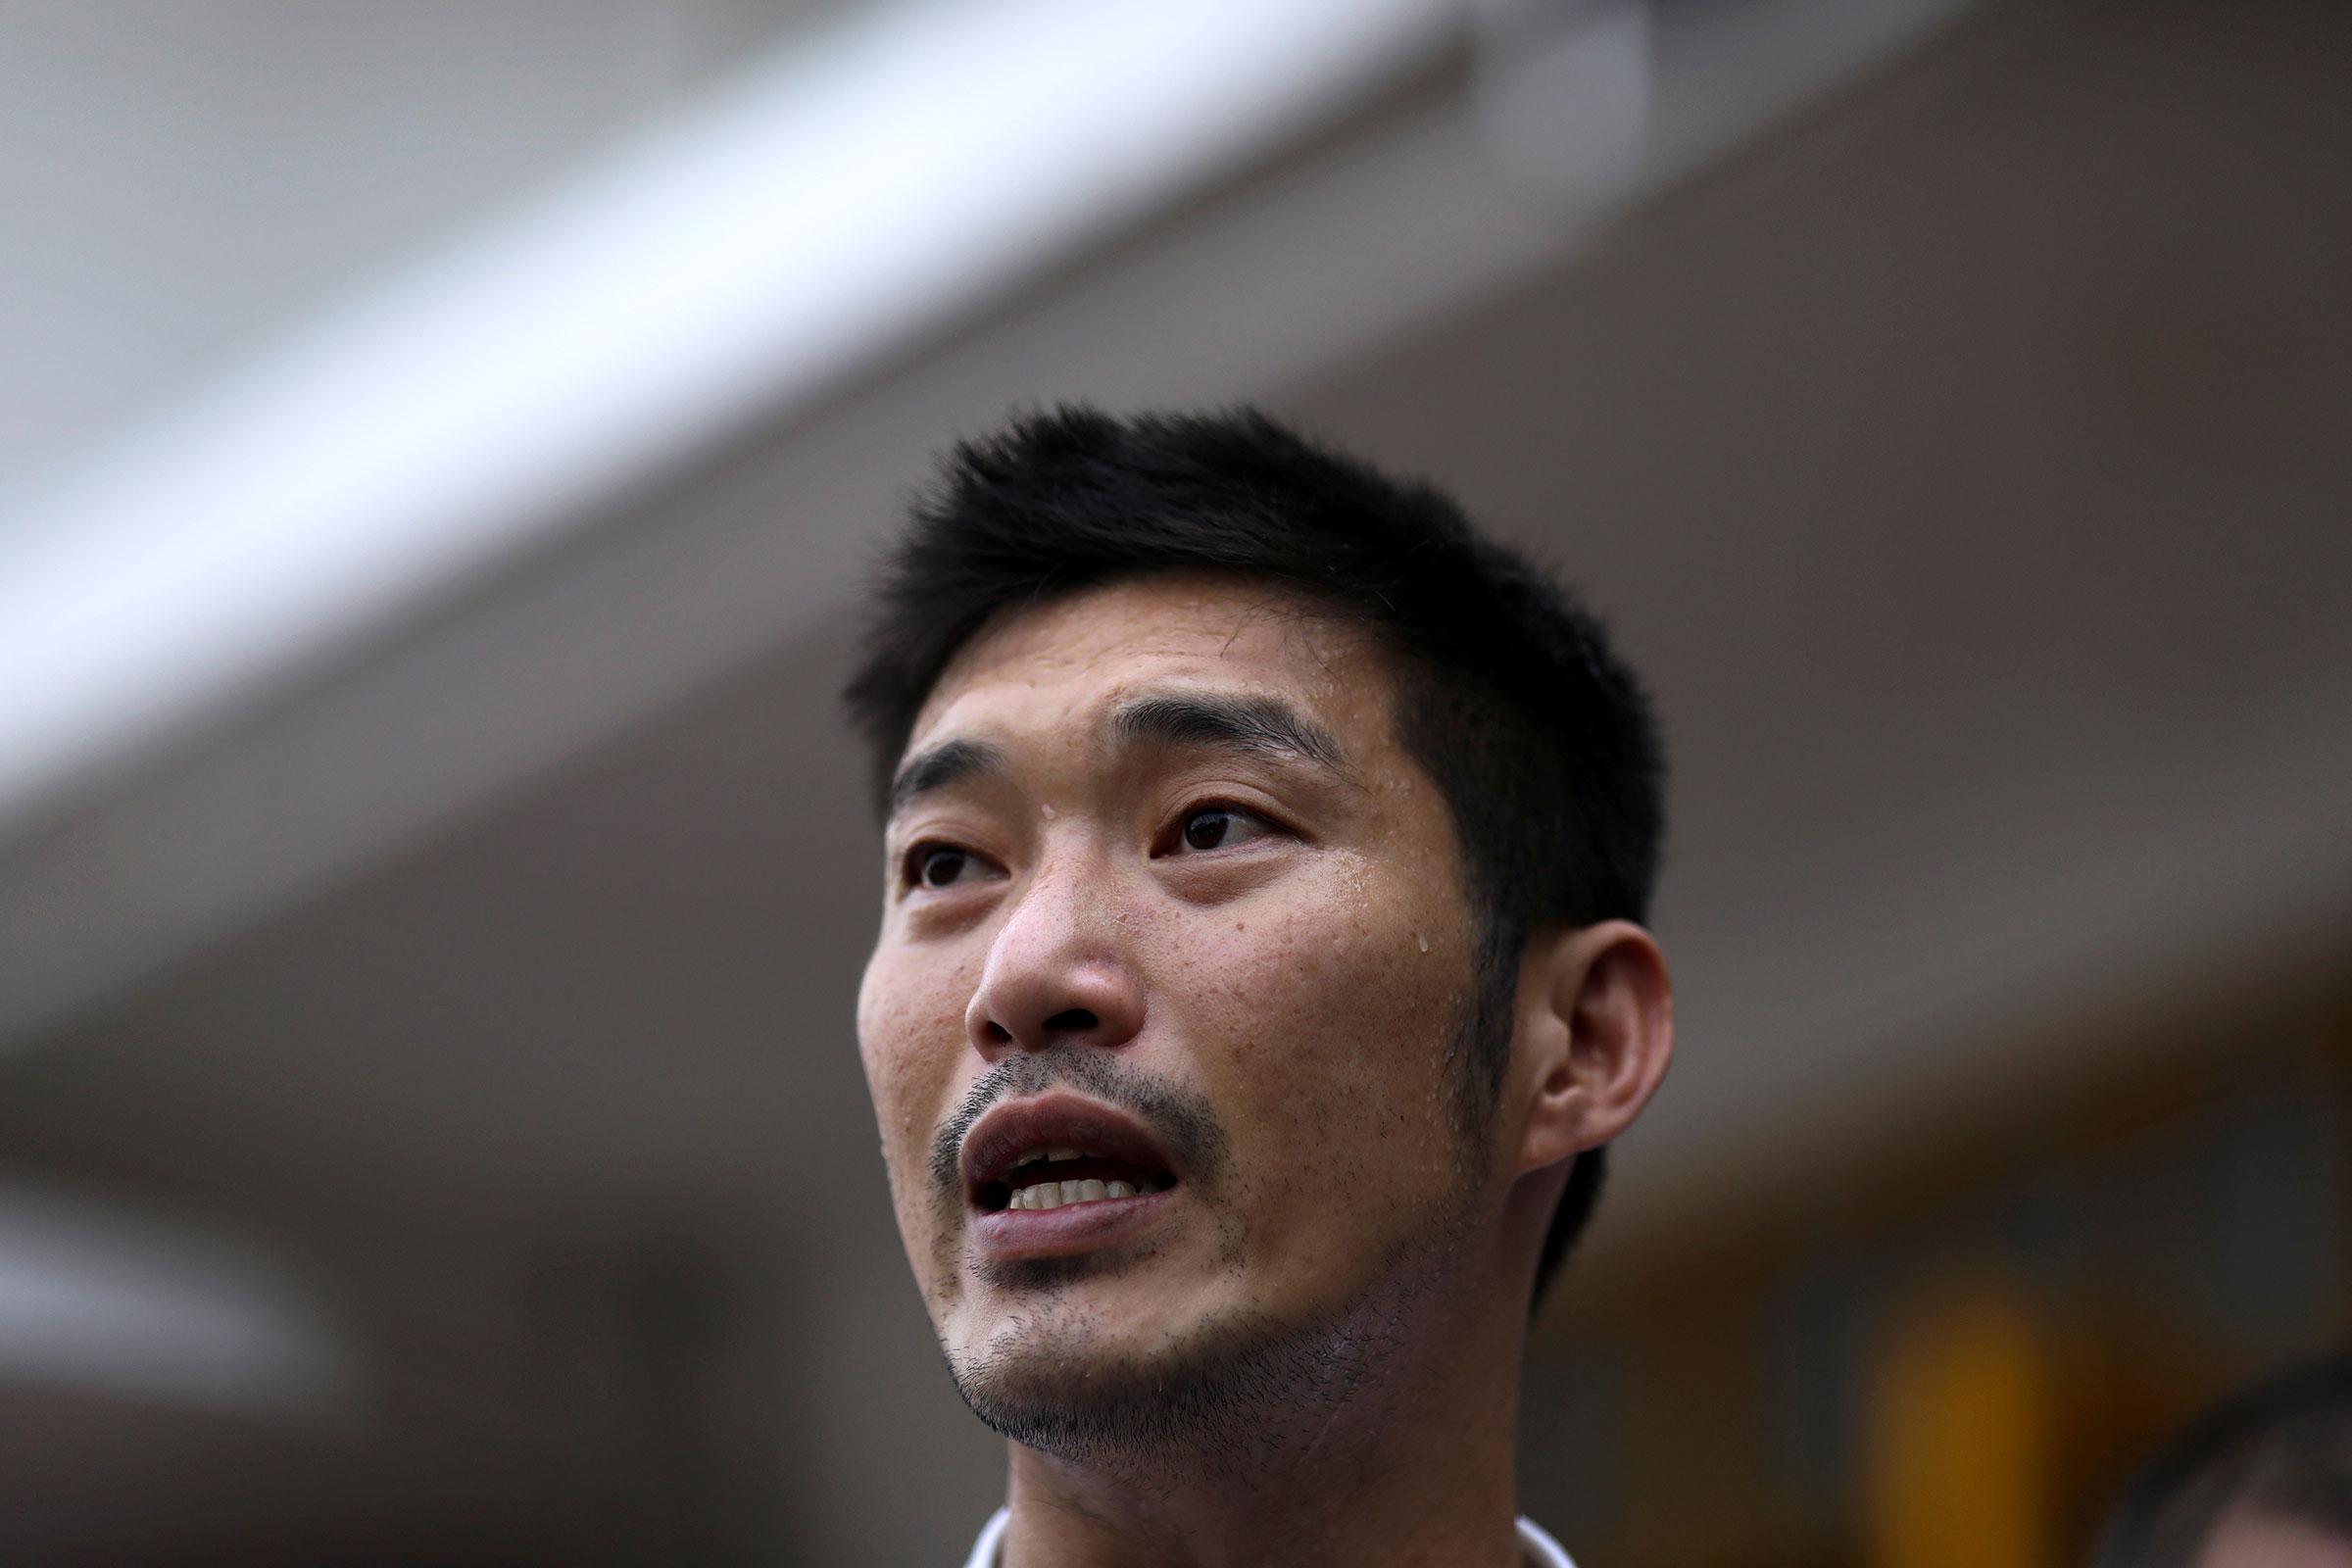 Thailand's opposition Future Forward Party leader Thanathorn Juangroongruangkit speaks before he reports to a Bangkok police station to hear charges filed against him for organizing the country's biggest protest since the 2014 coup, in Thailand, on Jan. 10, 2020. (Athit Perawongmetha—Reuters)